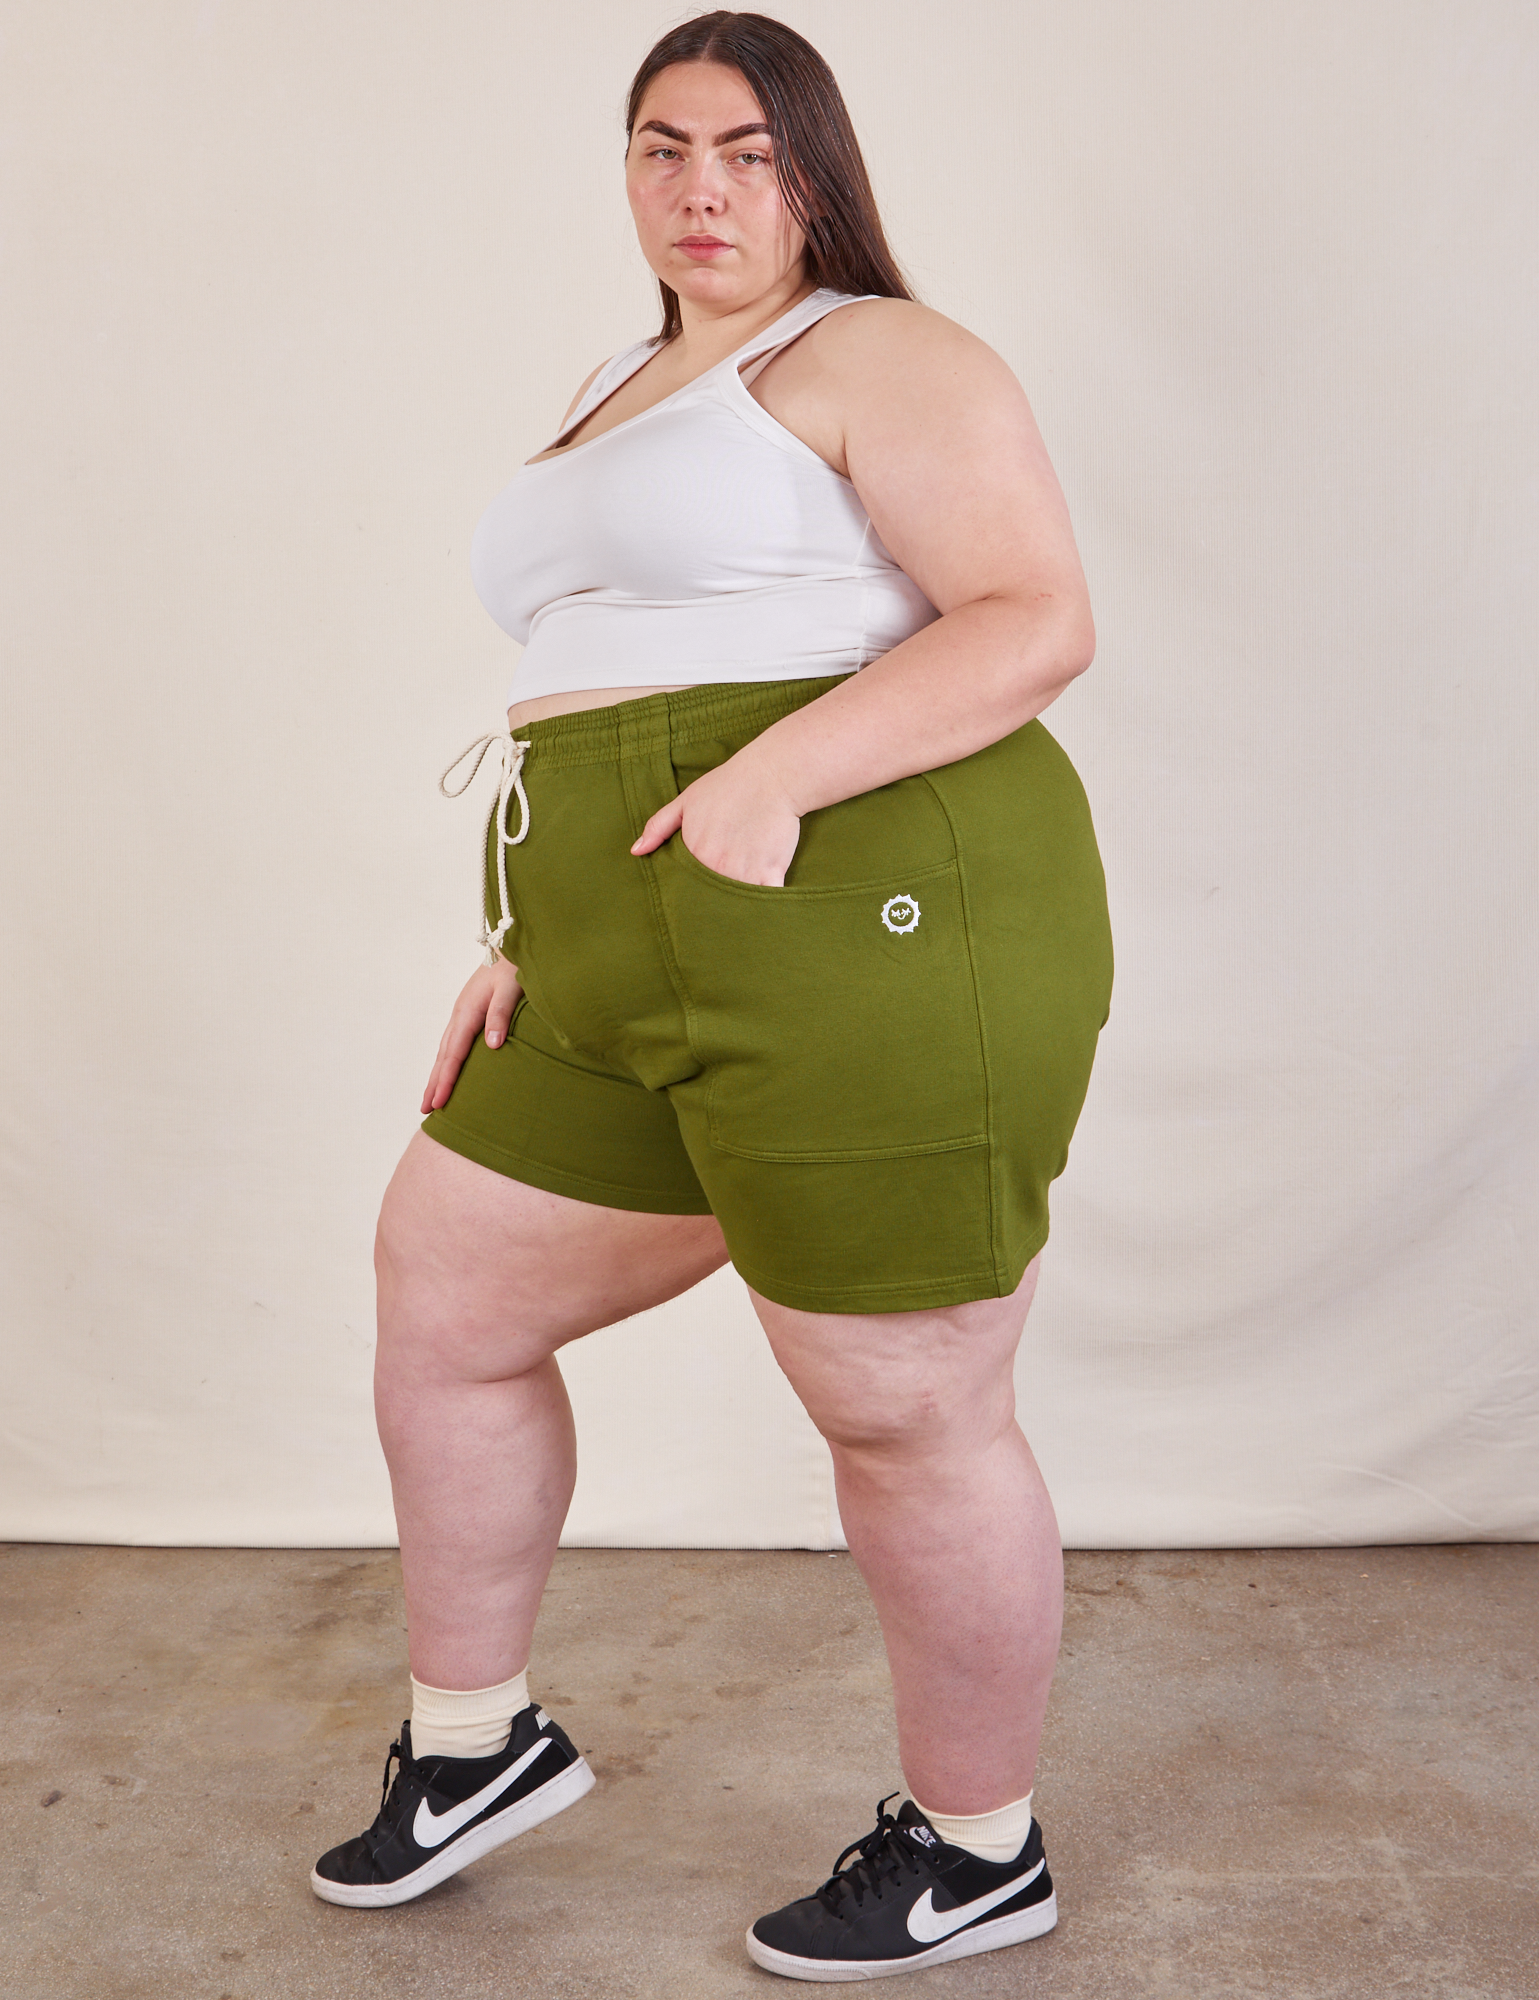 Side view of Lightweight Sweat Shorts in Summer Olive and Cropped Tank in vintage tee off-white on Marielena